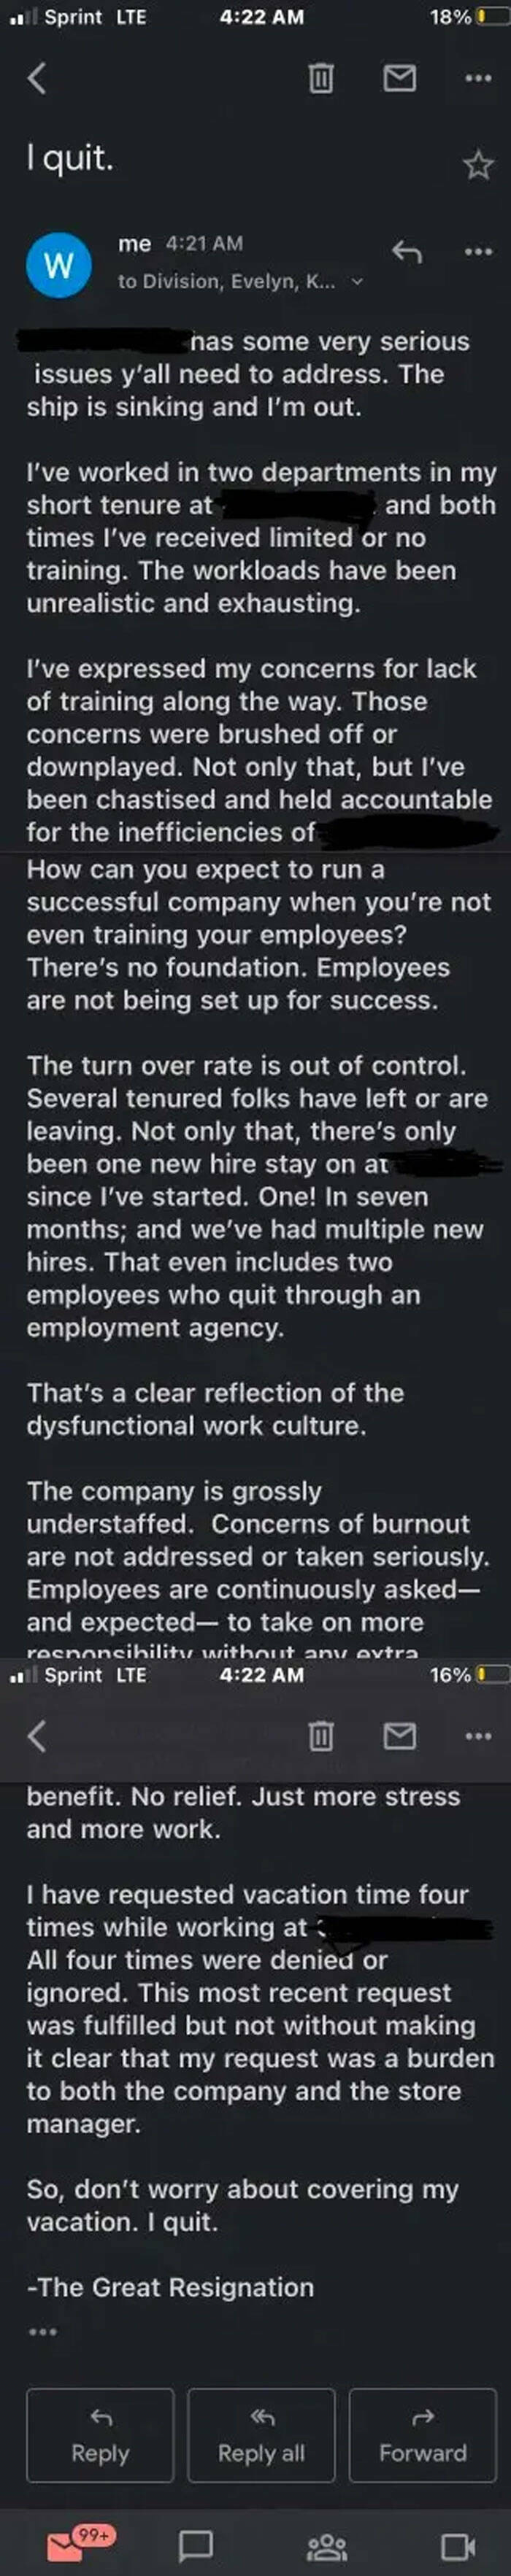 Employees Sharing Their Horrible Boss Stories